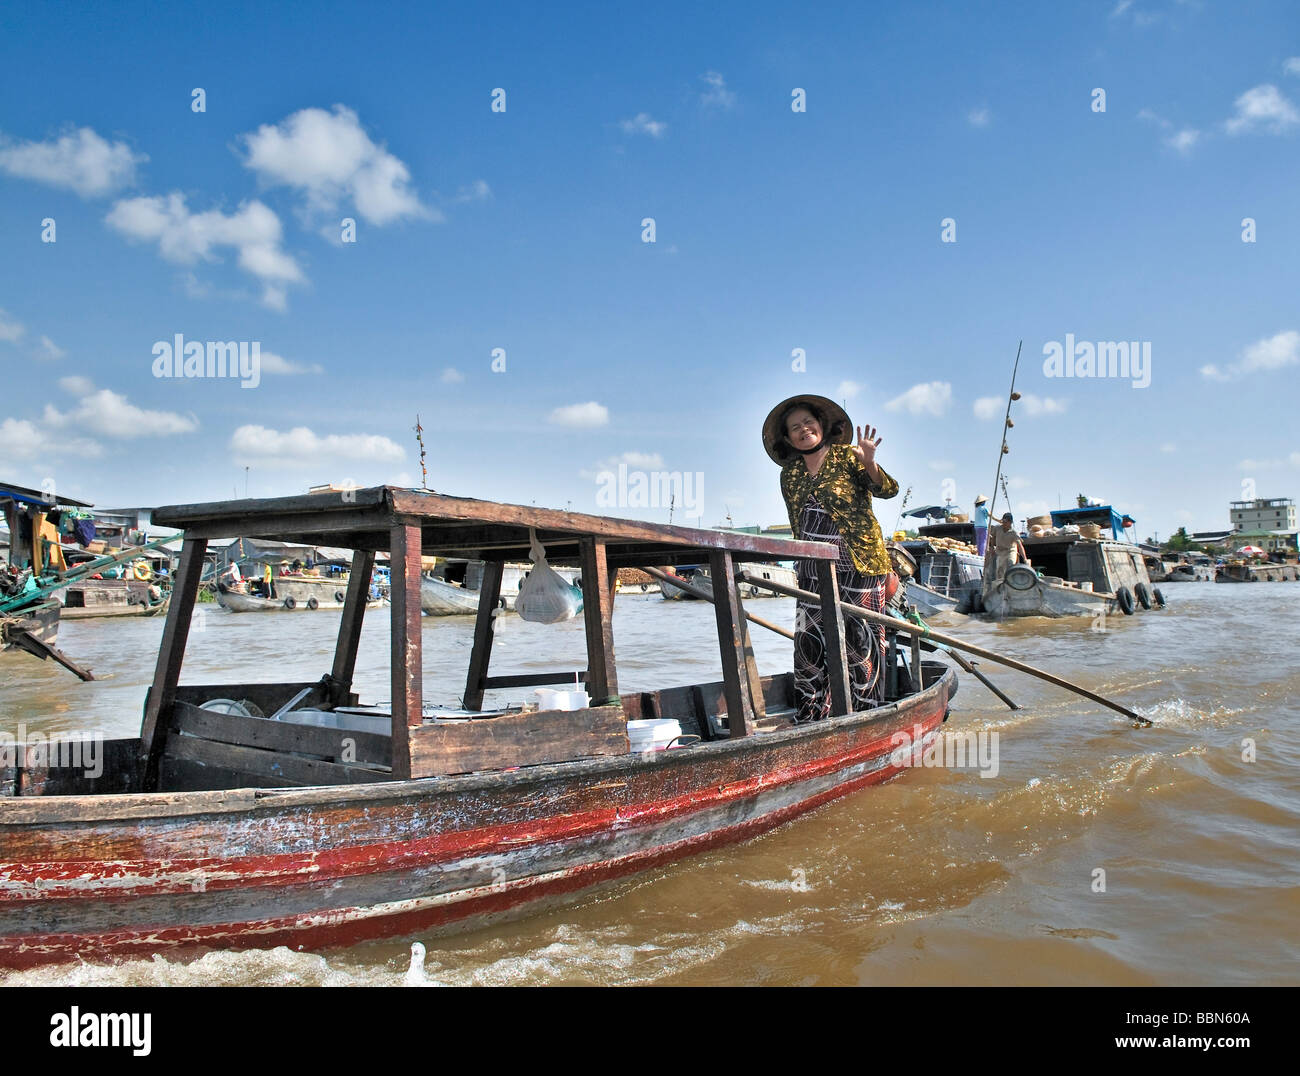 Woman with traditional hat, cone-shaped hat made of palm leaves, standing and rowing a wooden boat on the Mekong, Mekong Delta, Stock Photo